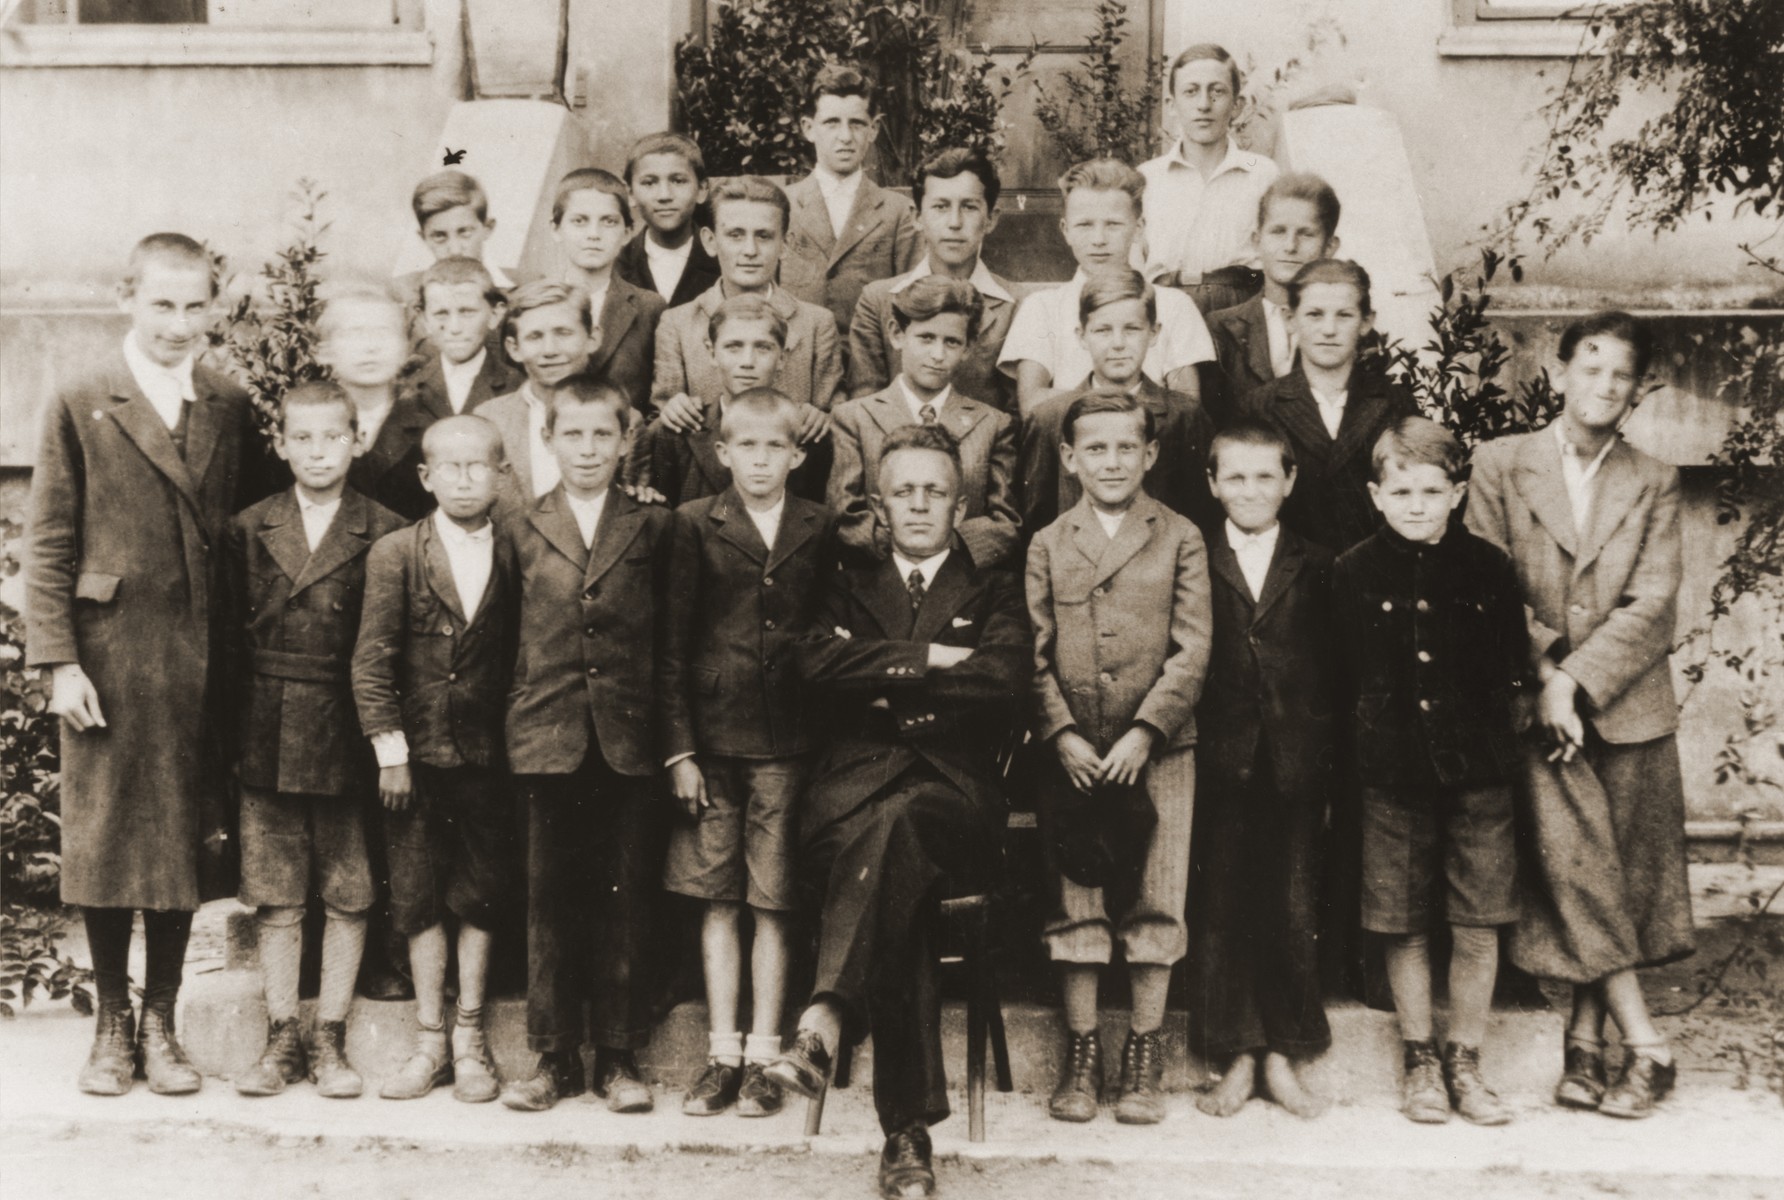 Group portrait of students and teachers at a school in Oswiecim, Poland.

Among those pictured is Szmuel Aron Silbiger.